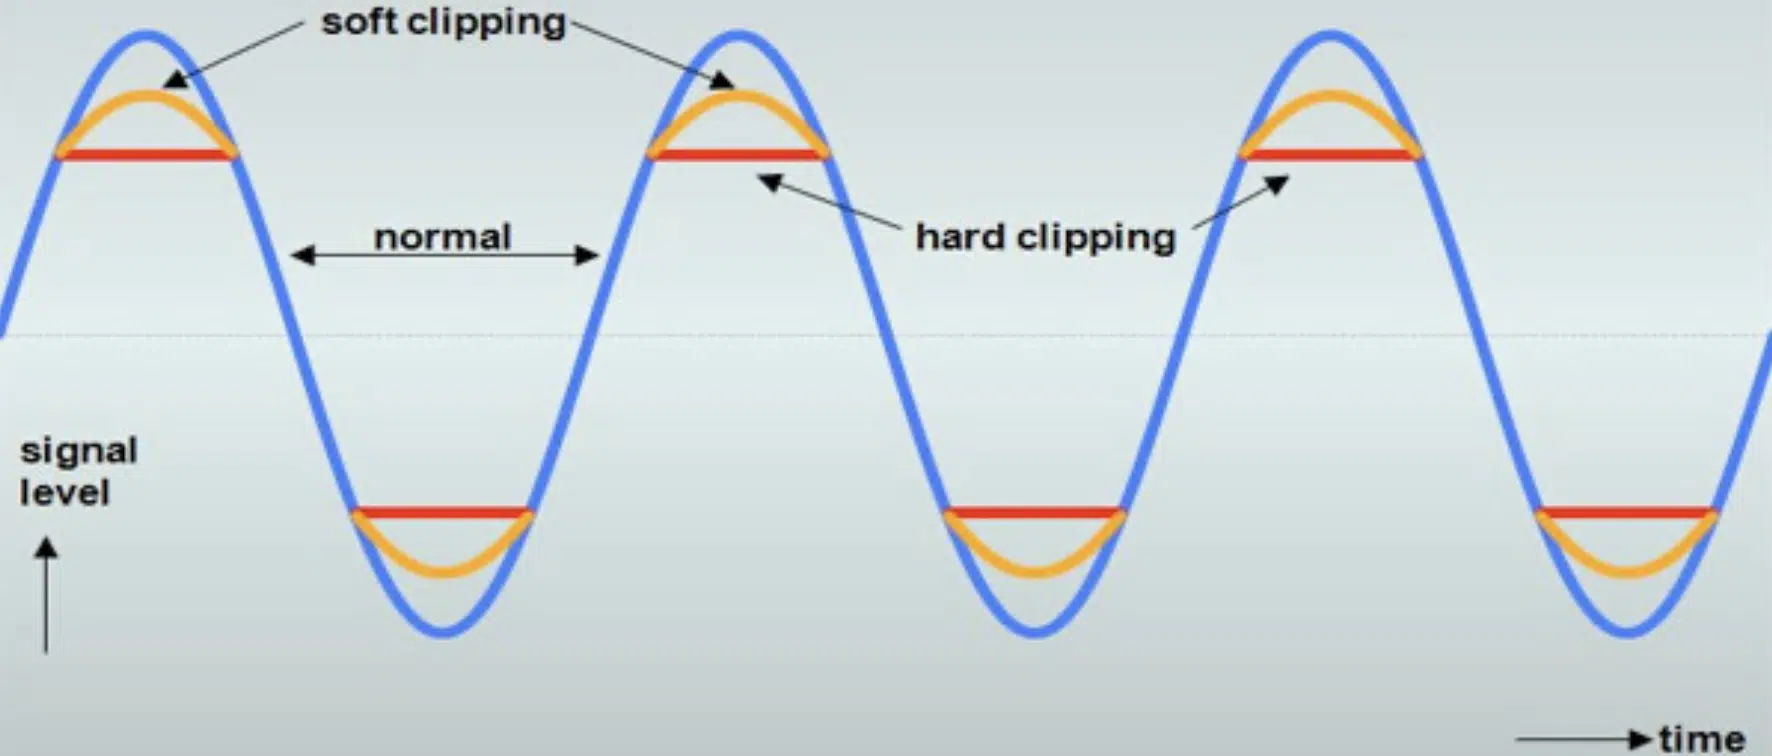 Soft clipping vs hard clipping - Unison